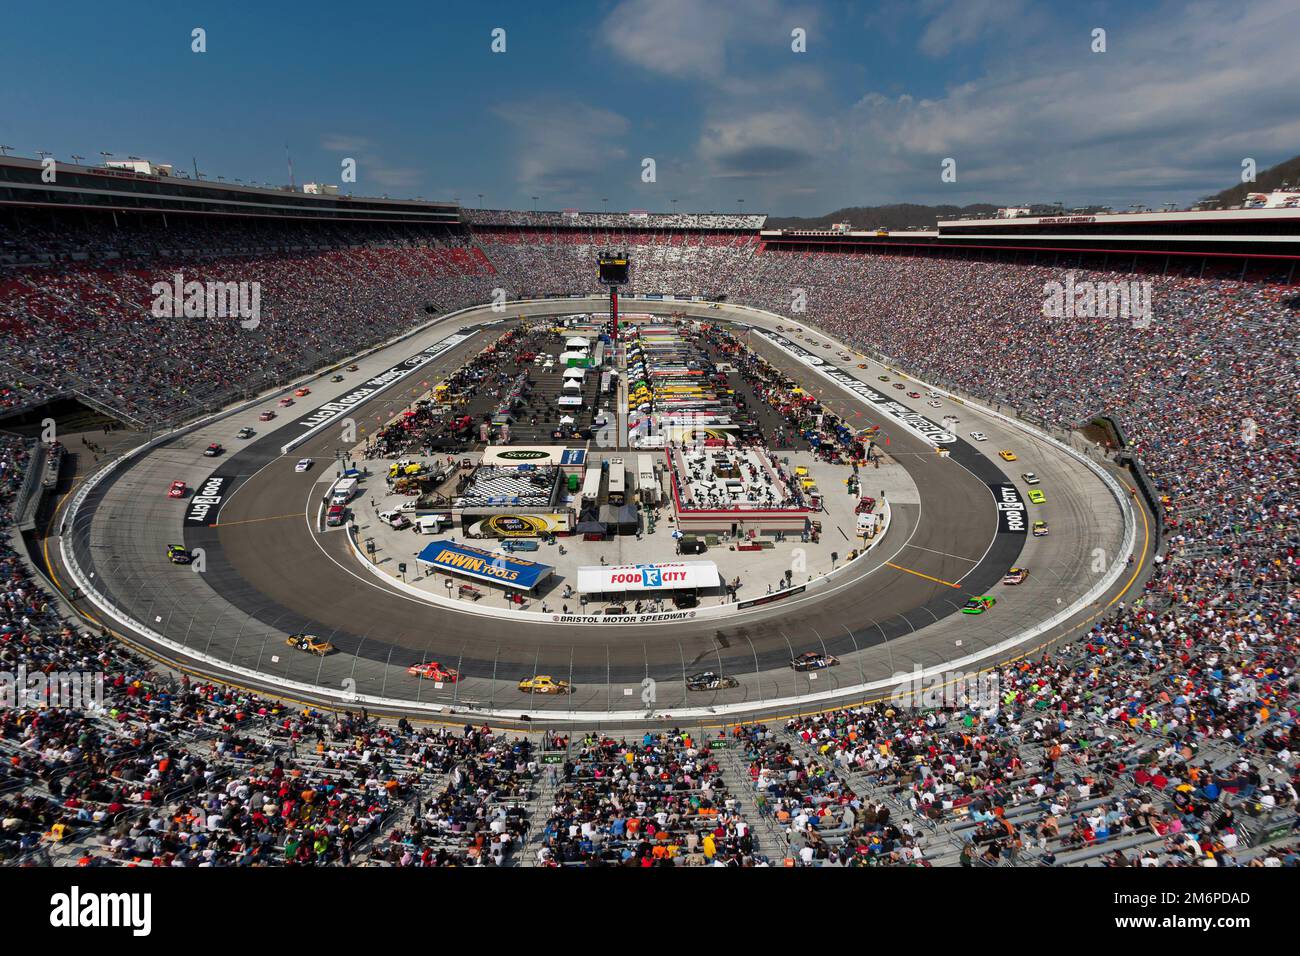 BRISTOL, TN - MAR 20, 2011: The NASCAR Sprint Cup teams take to the track for the running of the Jeff Byrd 500 race at the Bristol Motor Speedway in Bristol, TN. Stock Photo